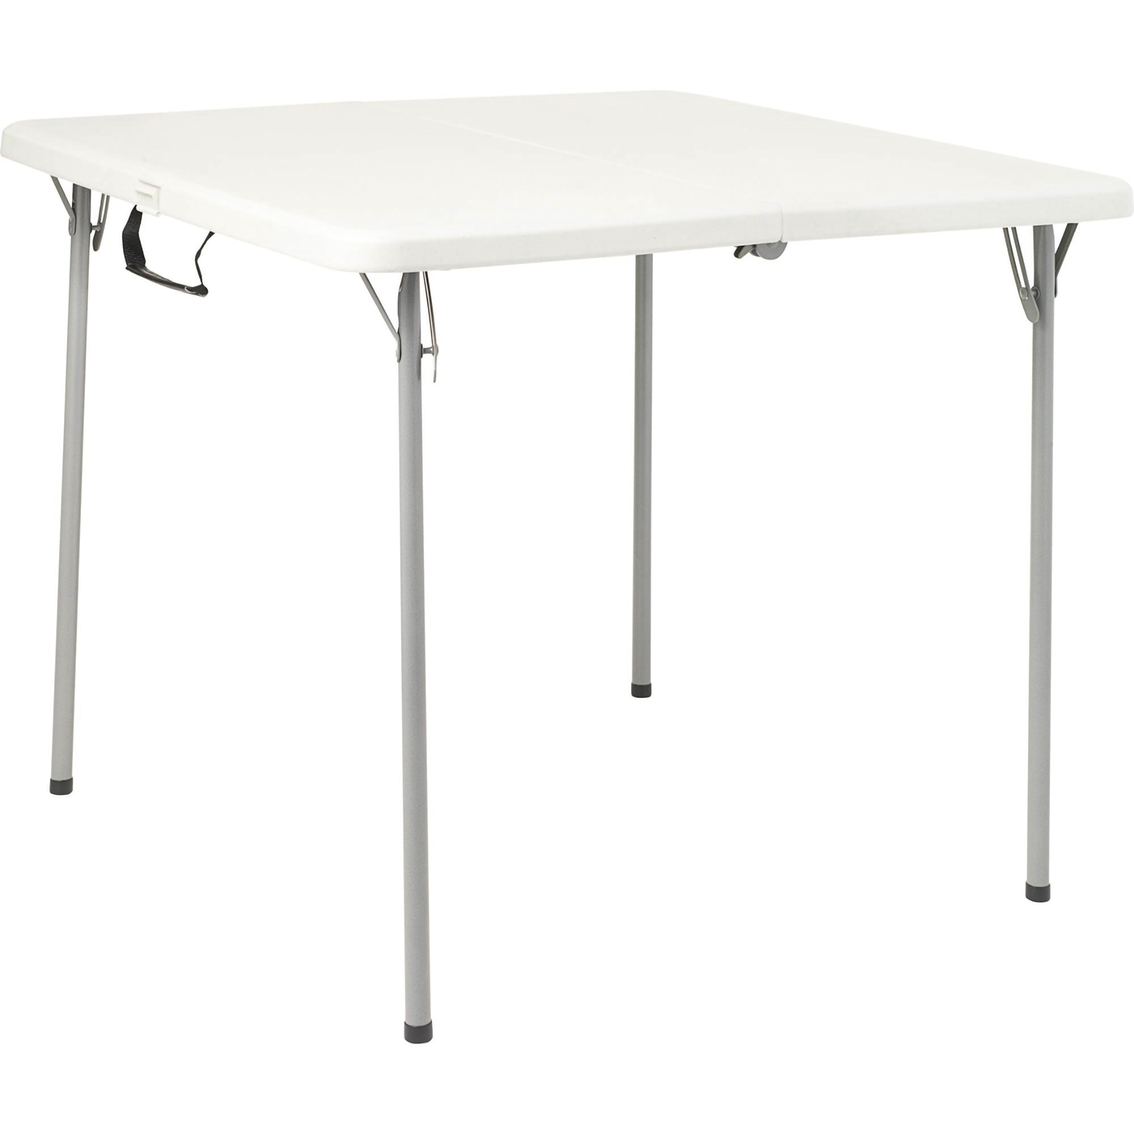 square folding tables for sale